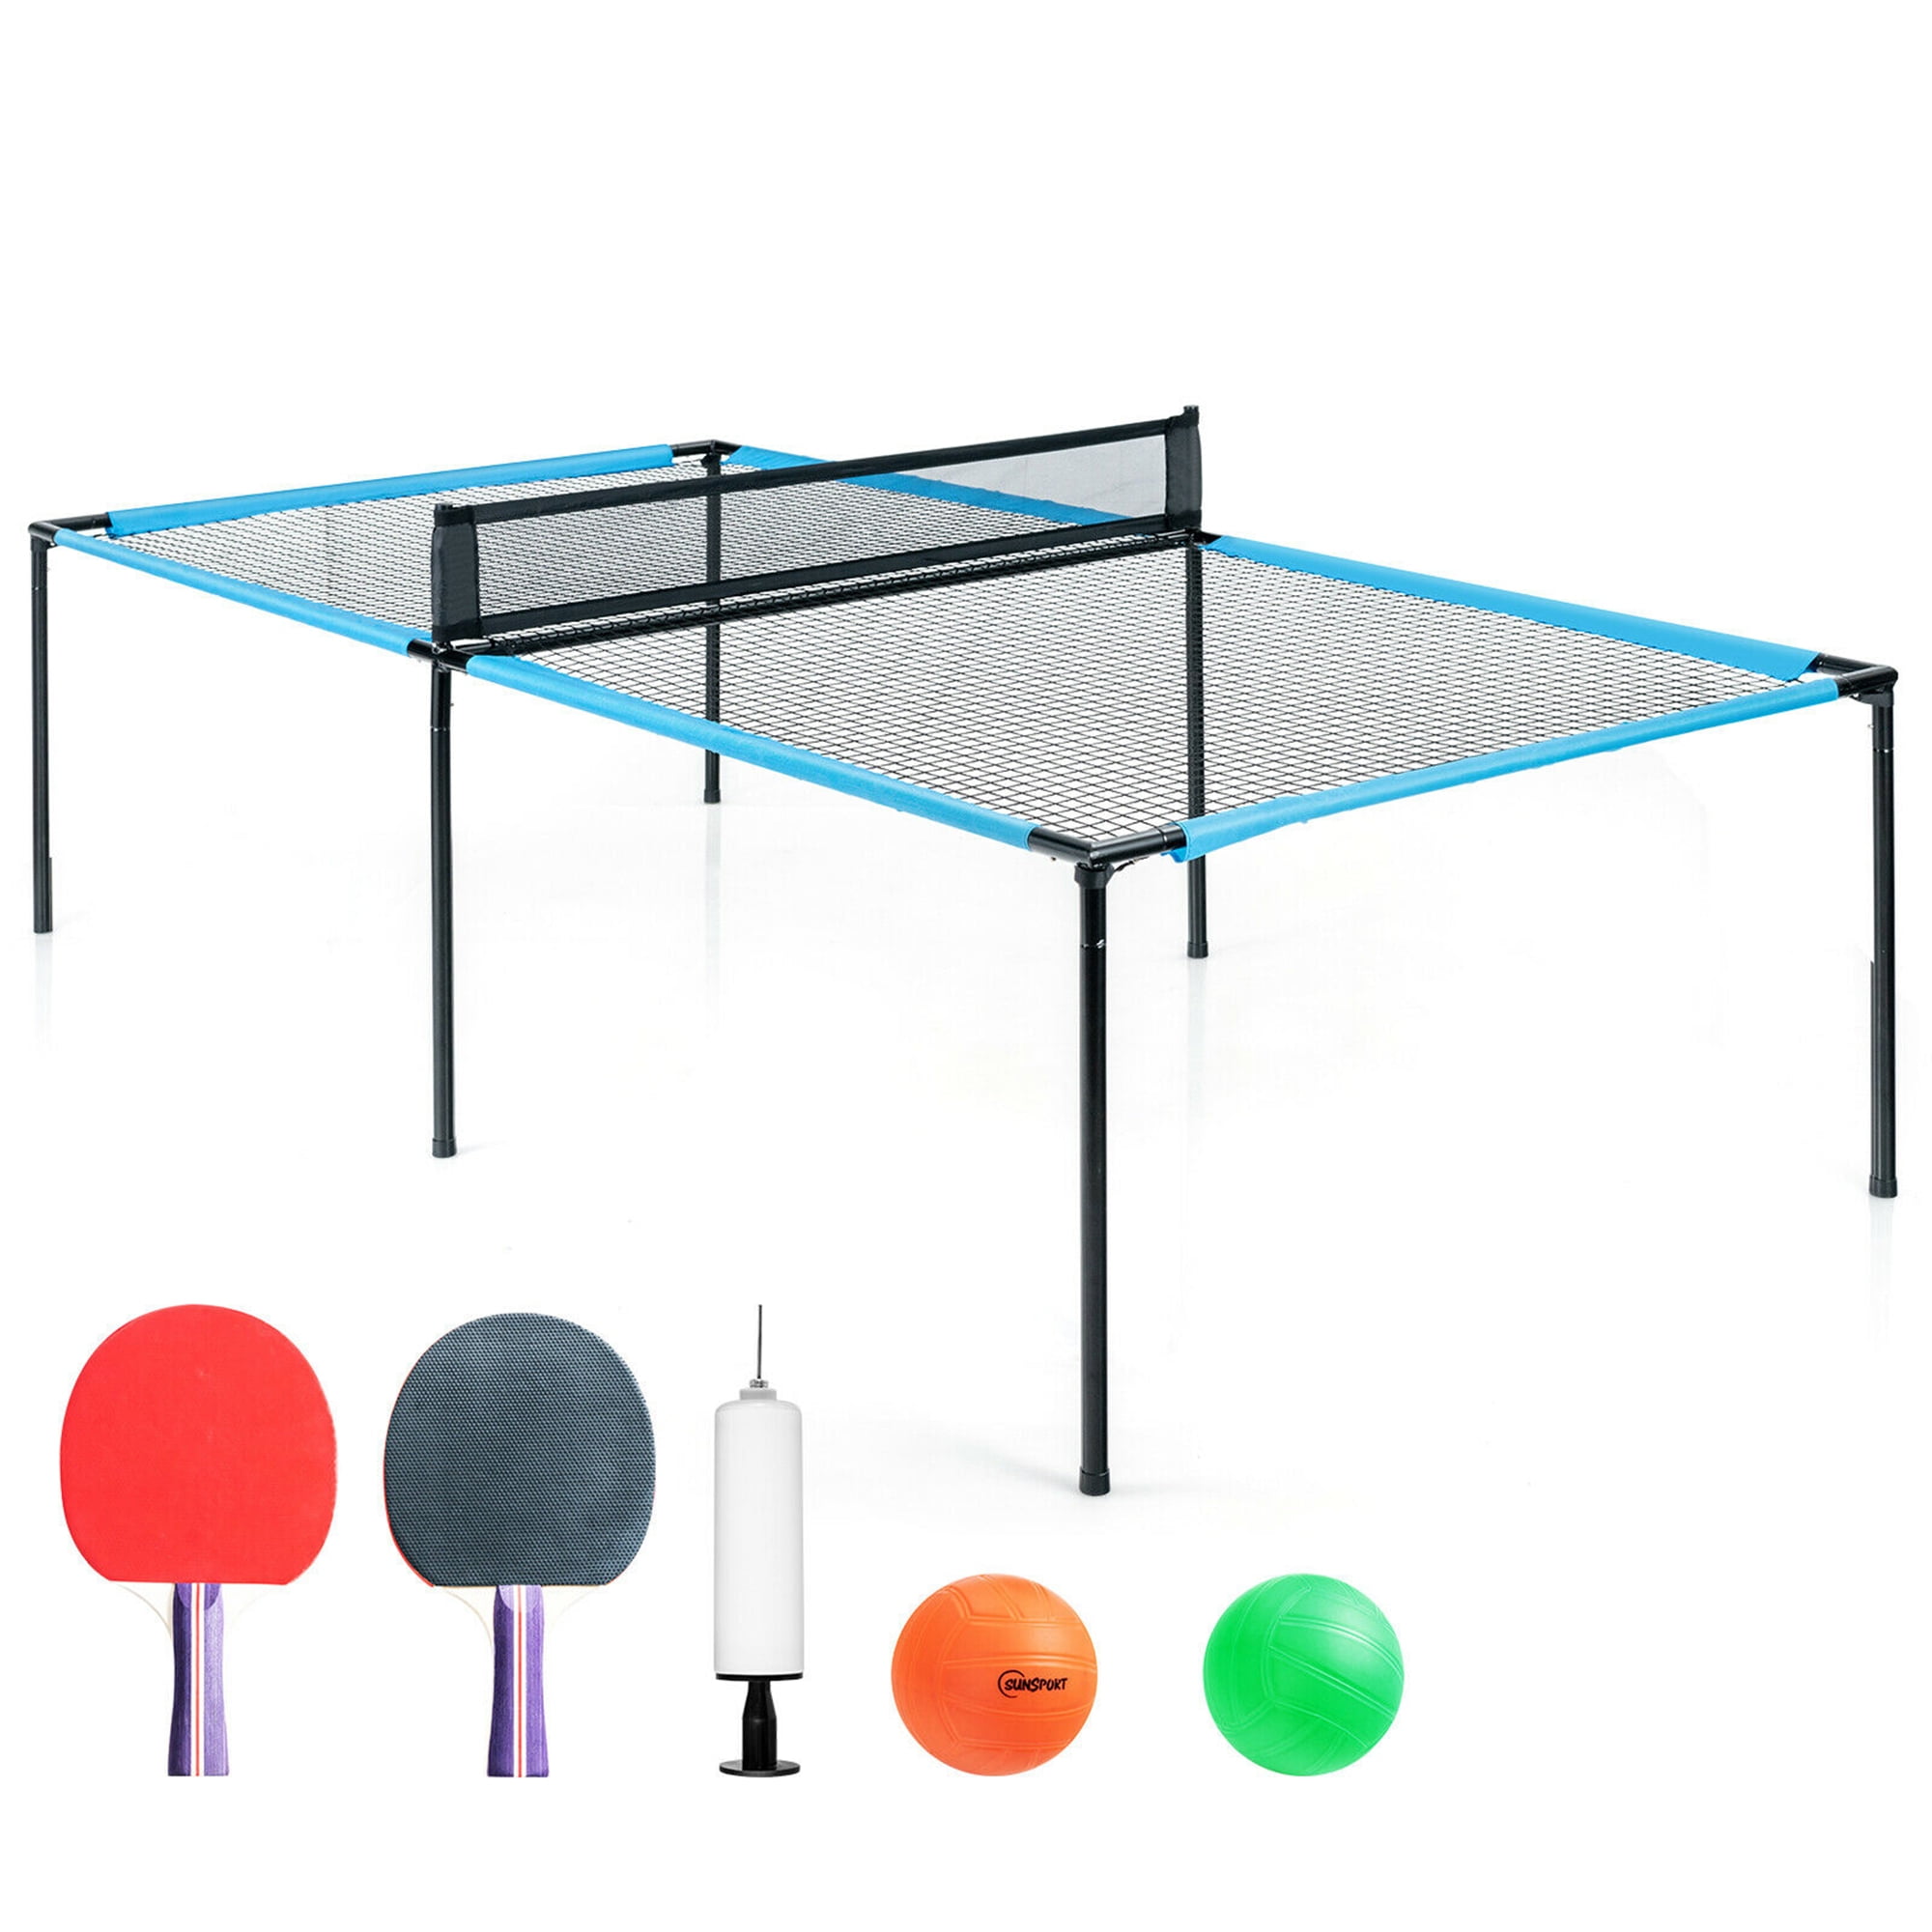 Table Tennis Beer Pong Games Toys Sports Play new 6 pack 